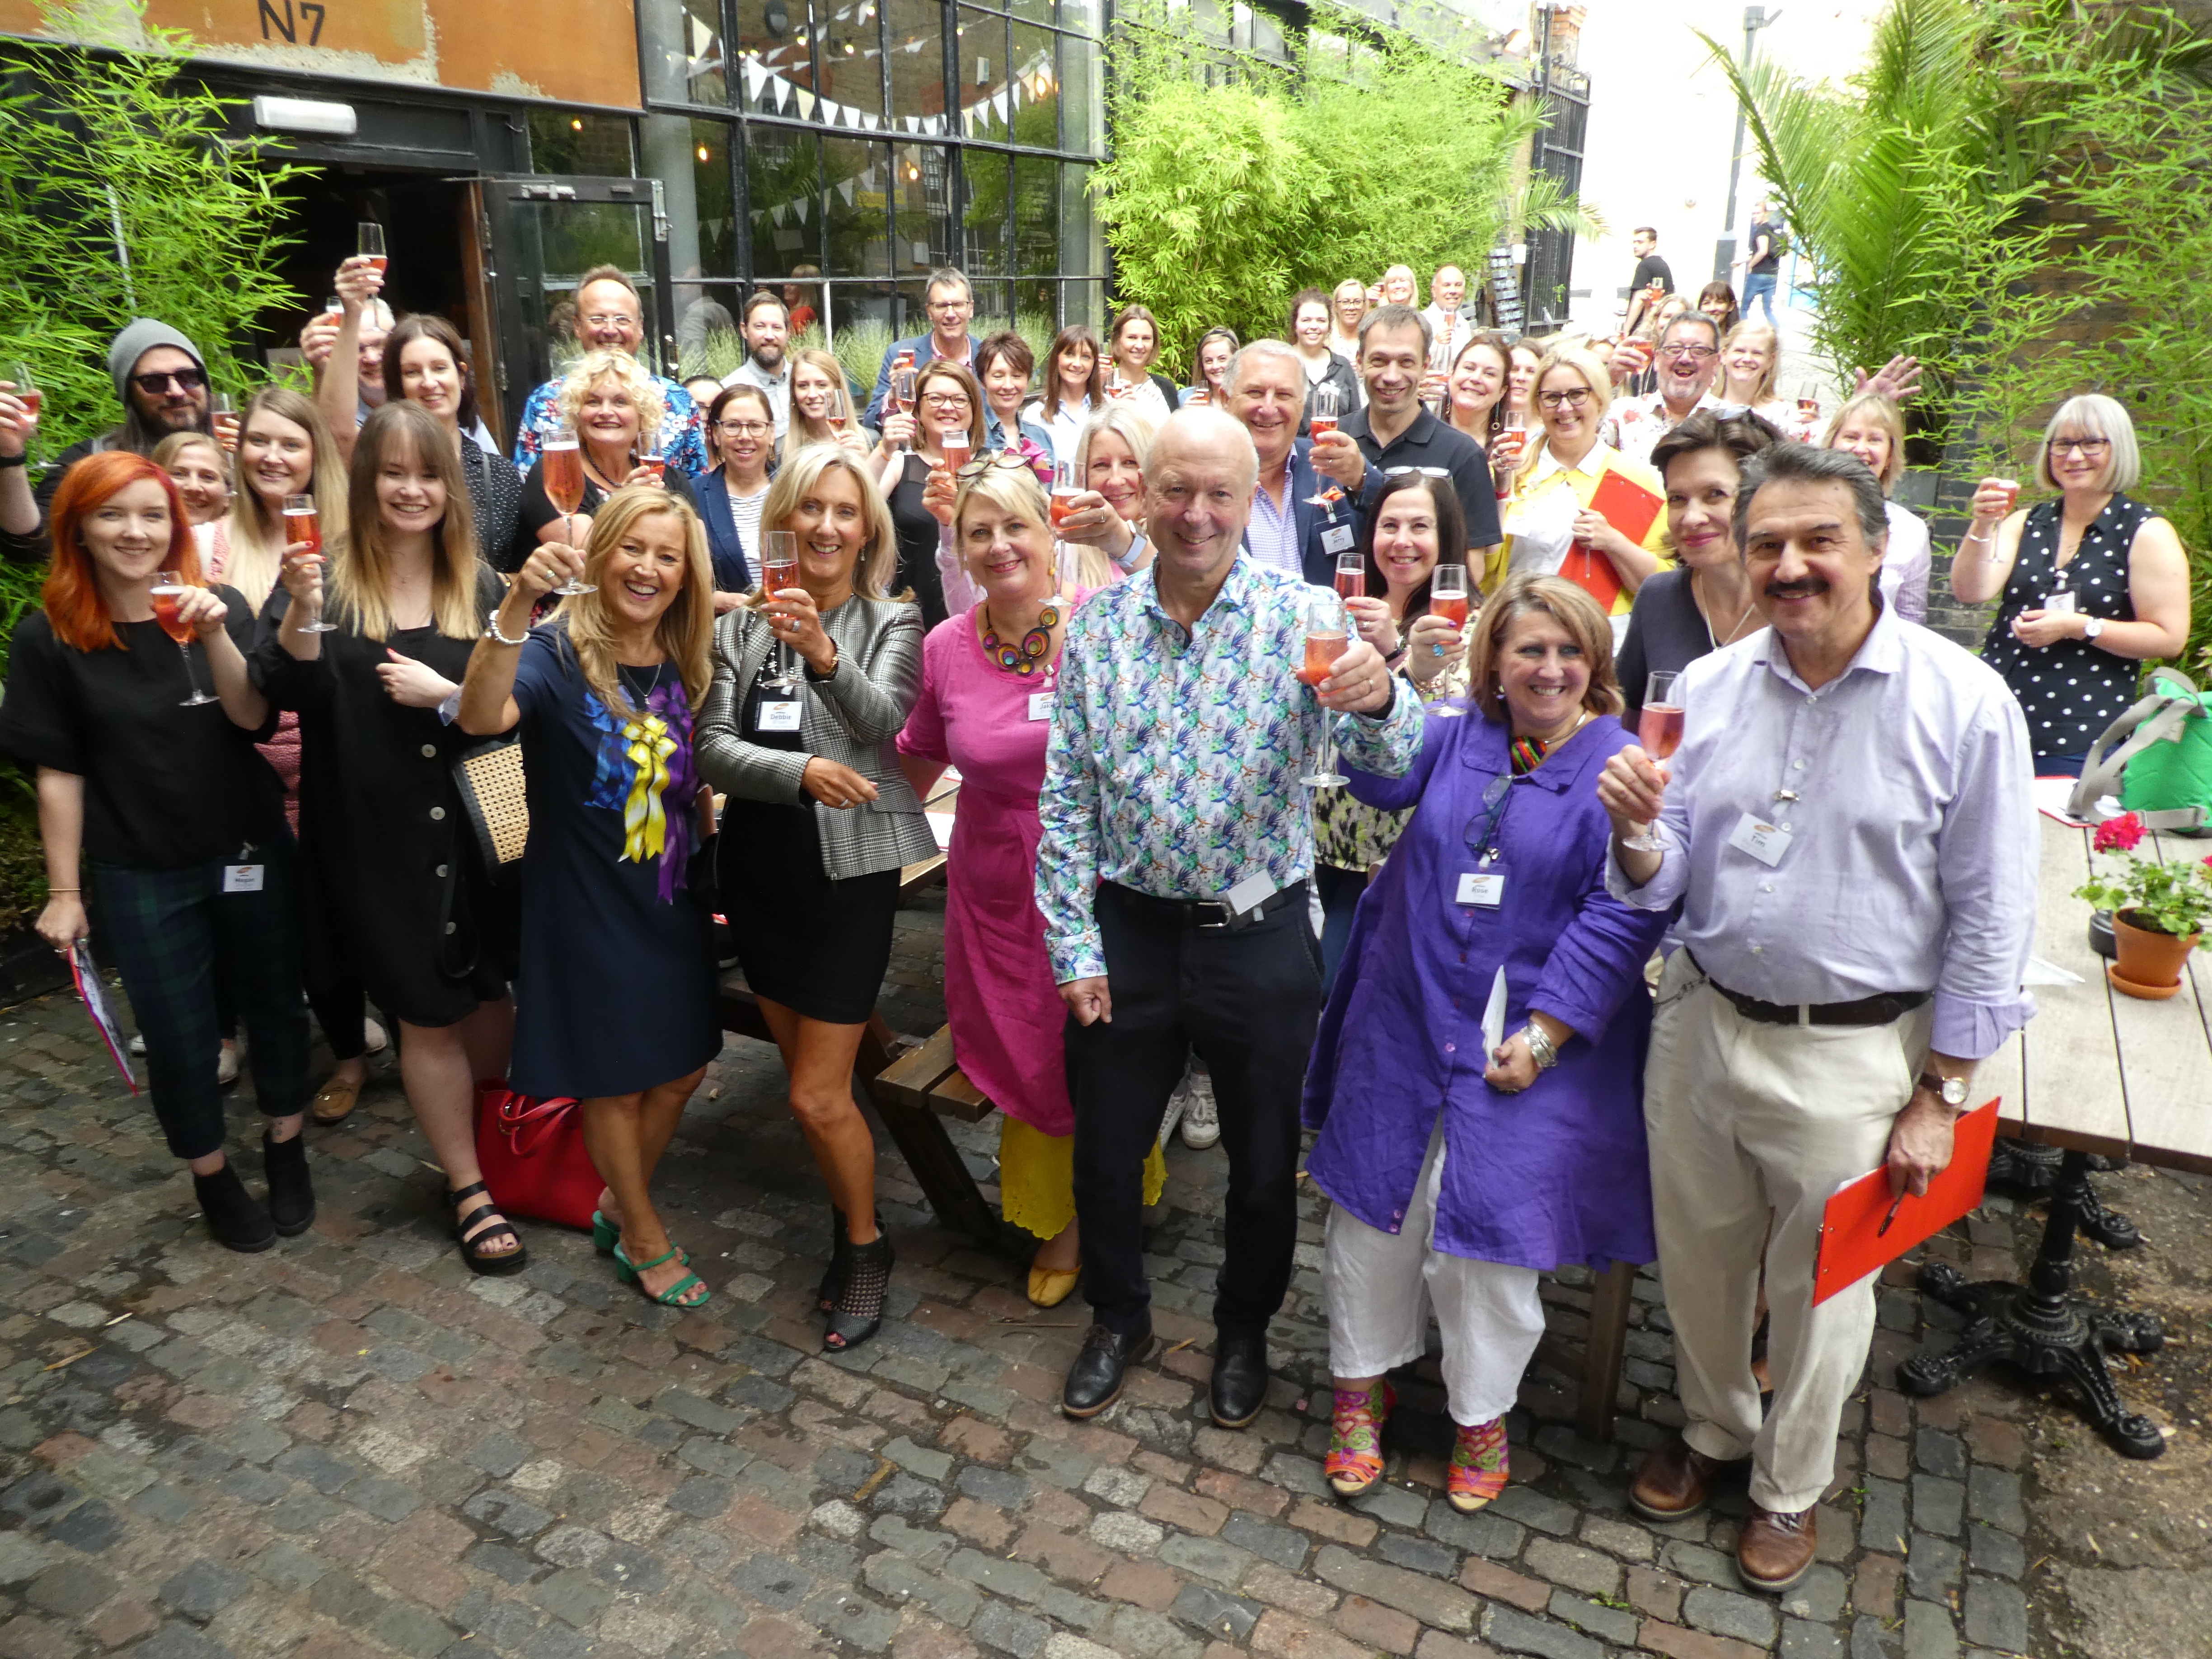 Above: Last year’s Henries Judging Panel and Henries’ organisers. Although this year the judging is online, the Judging Panel will be made up of equally enthusiastic retailers.